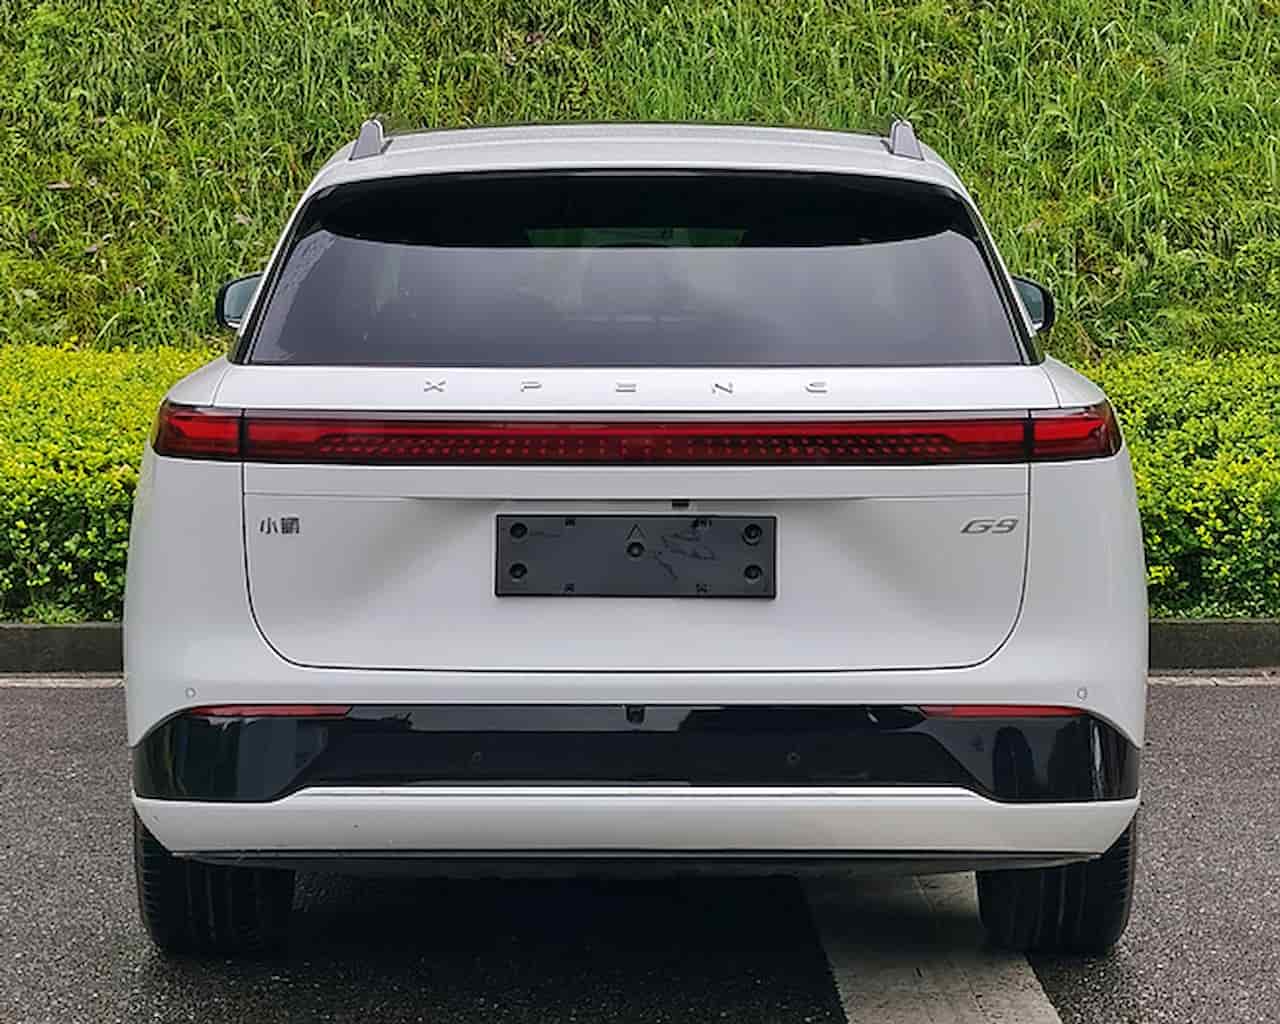 Xpeng G9 rear live image new